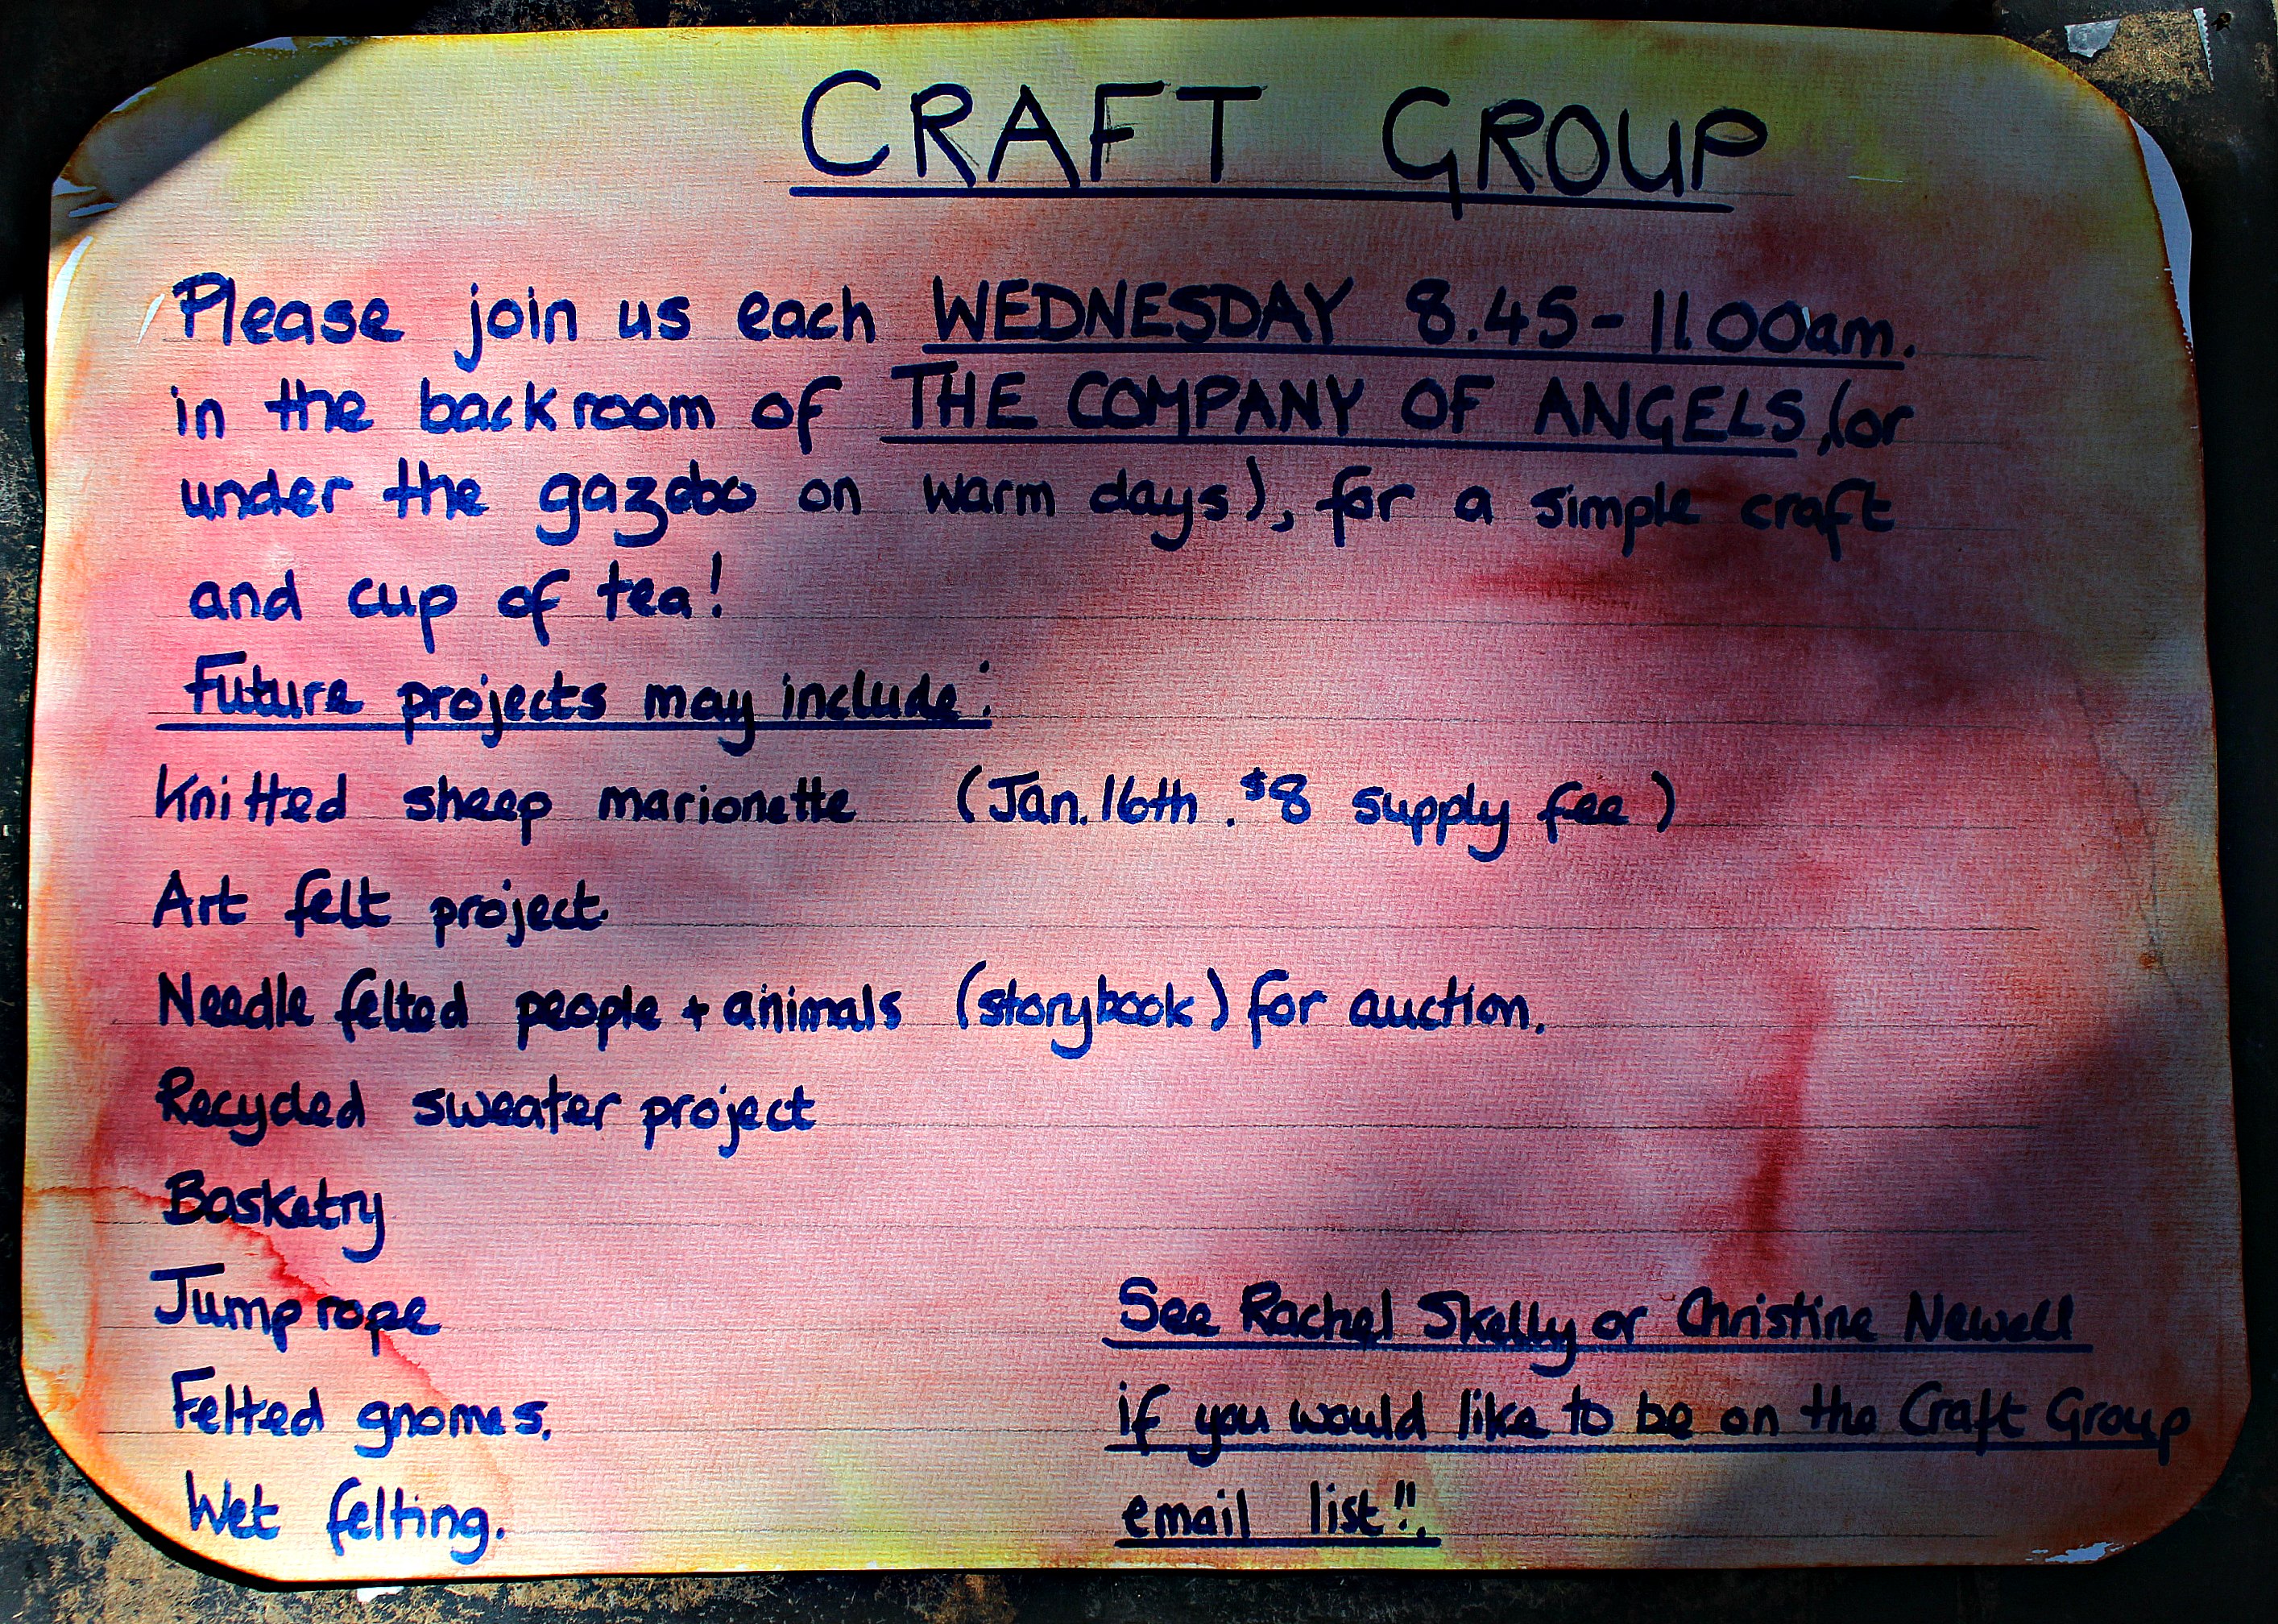 130116 Craft Group Schedule outside of the Company of Angels Store